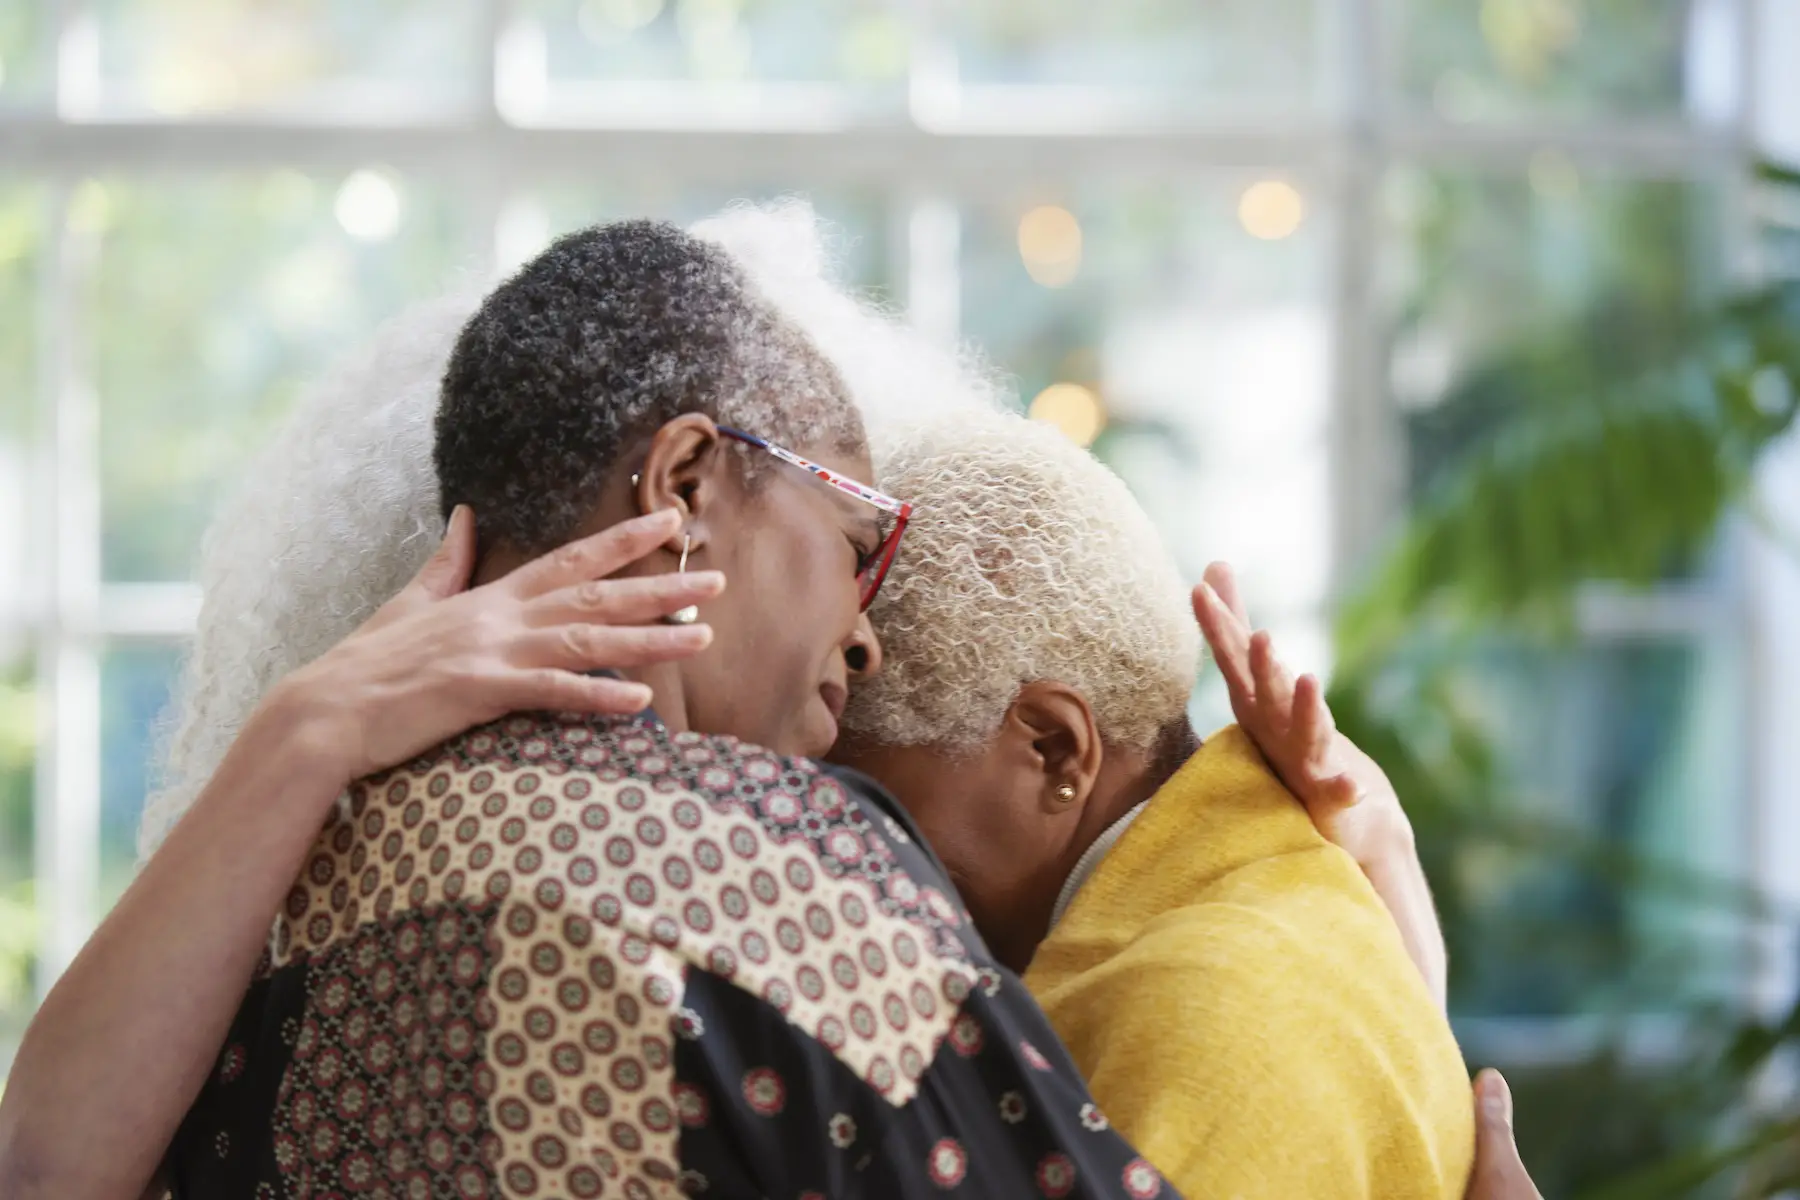 A close-up shot of three older women hugging each other in a brightly lit room